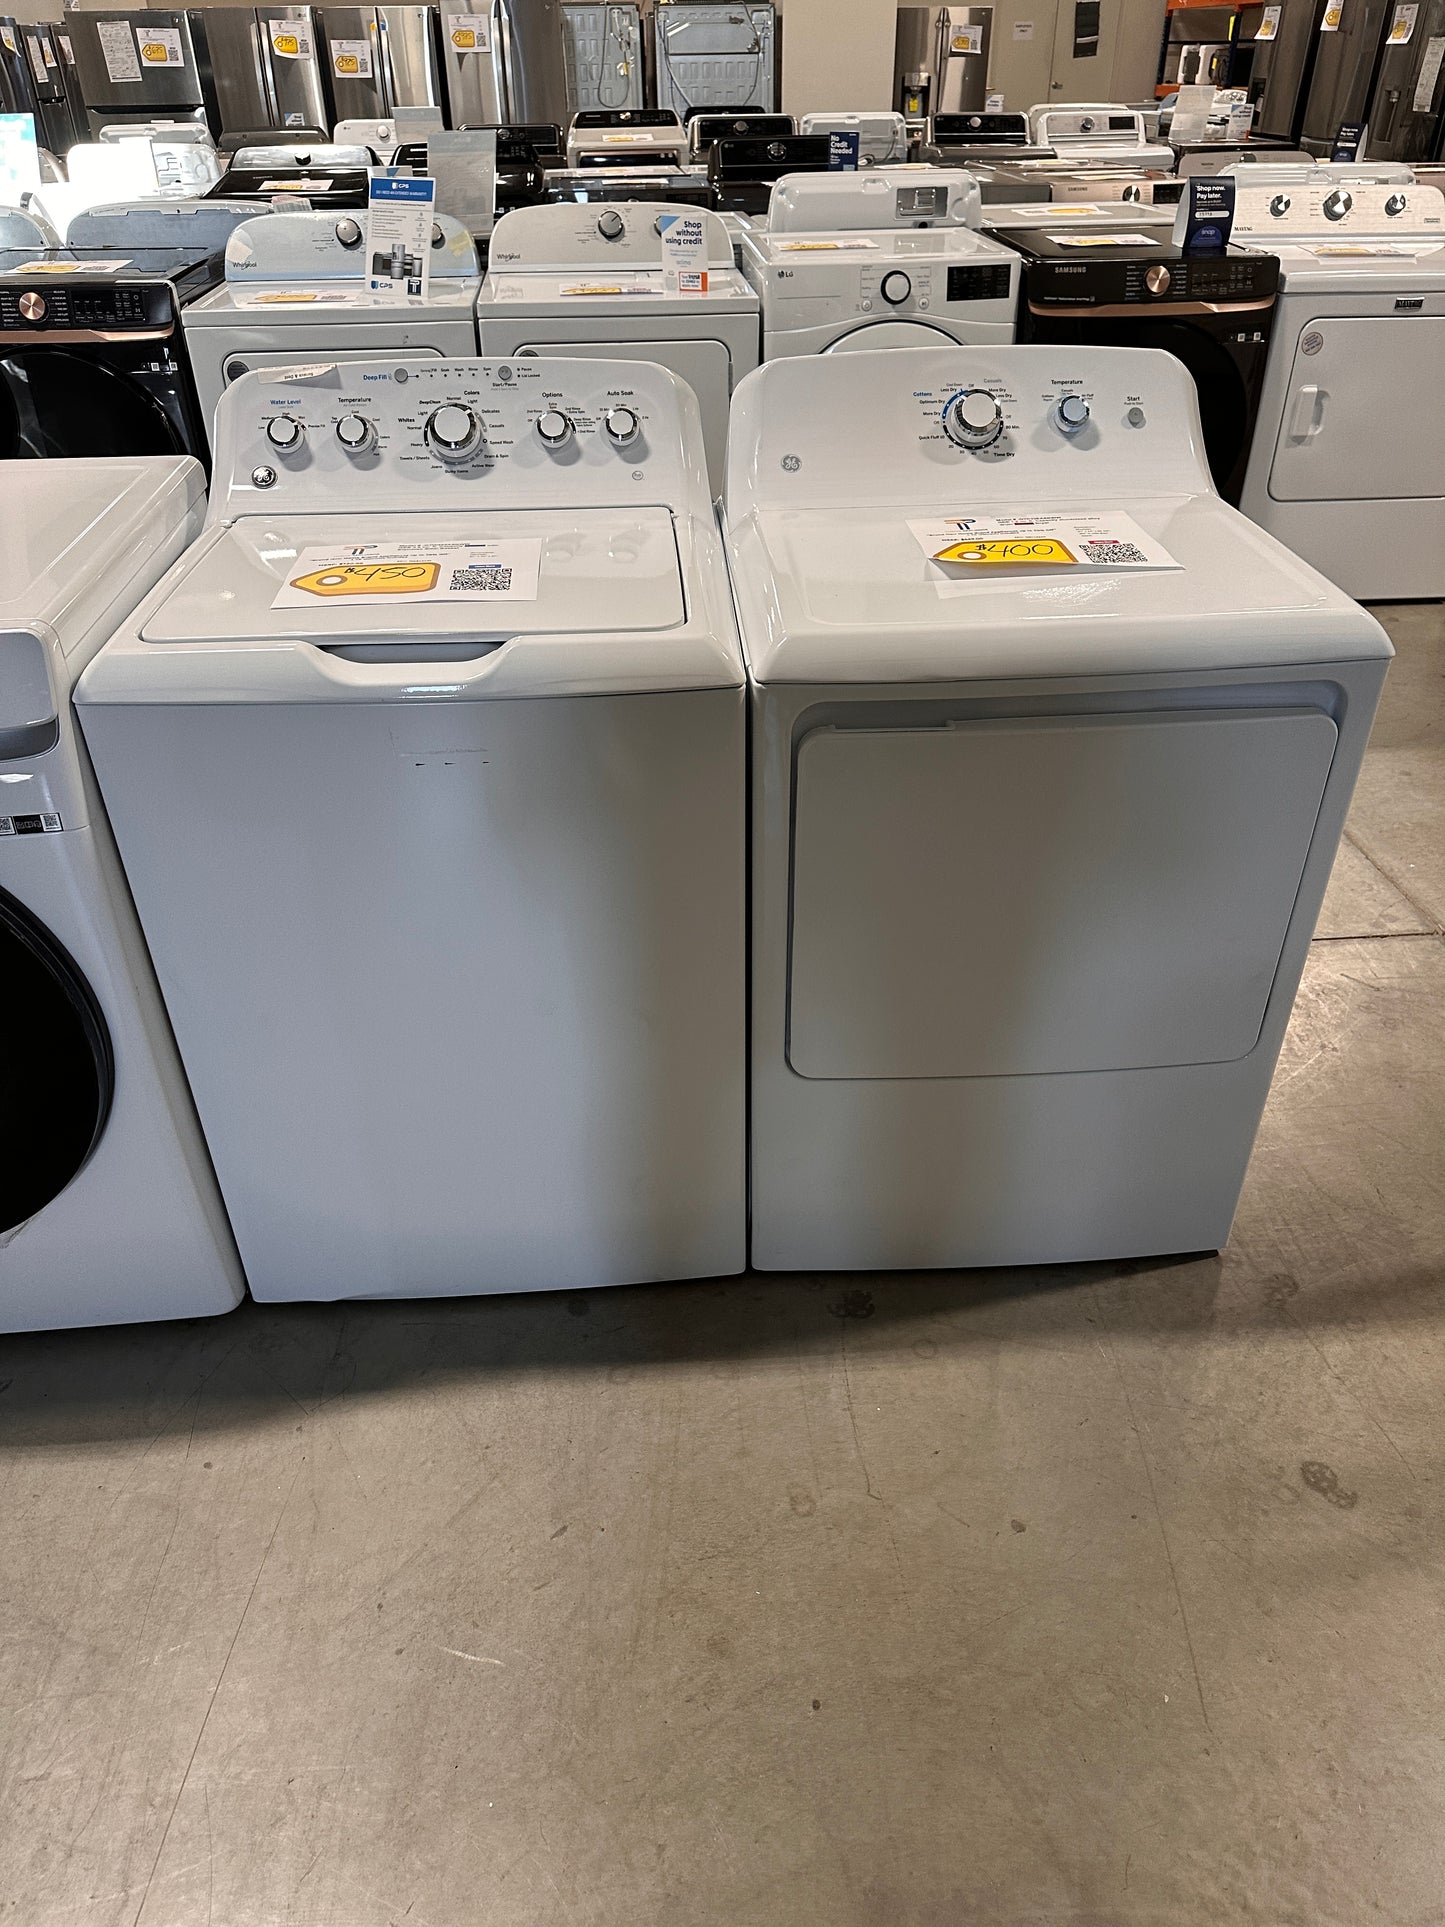 GREAT NEW GE TOP LOAD WASHER ELECTRIC DRYER LAUNDRY SET - WAS13122 DRY12340